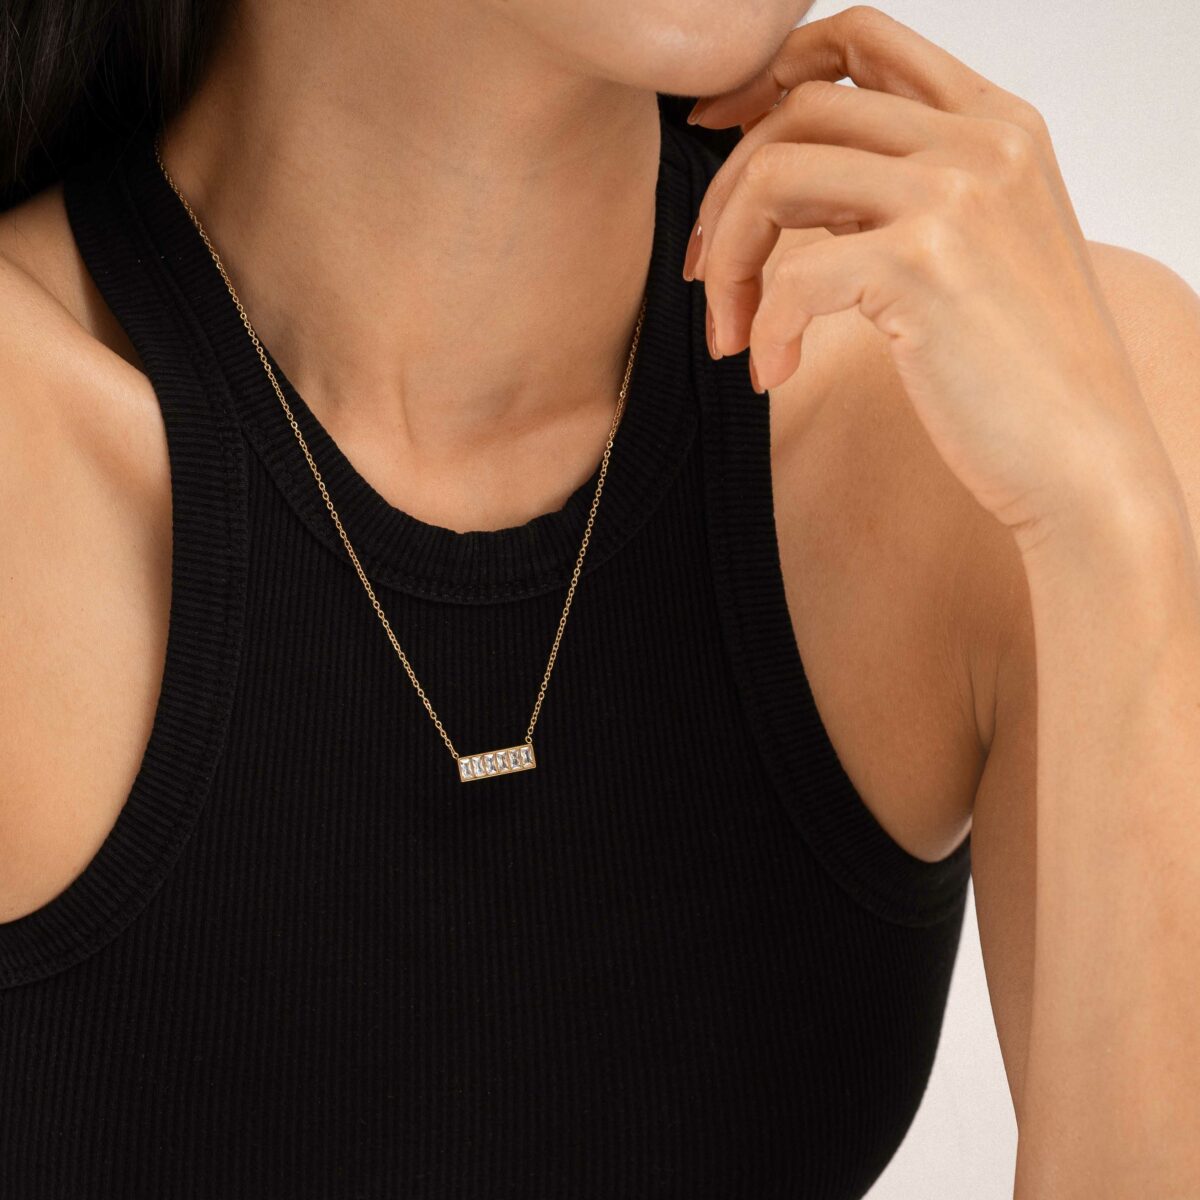 https://m.clubbella.co/product/solitaire-bar-necklace/ GALA BAR NECKLACE (5)